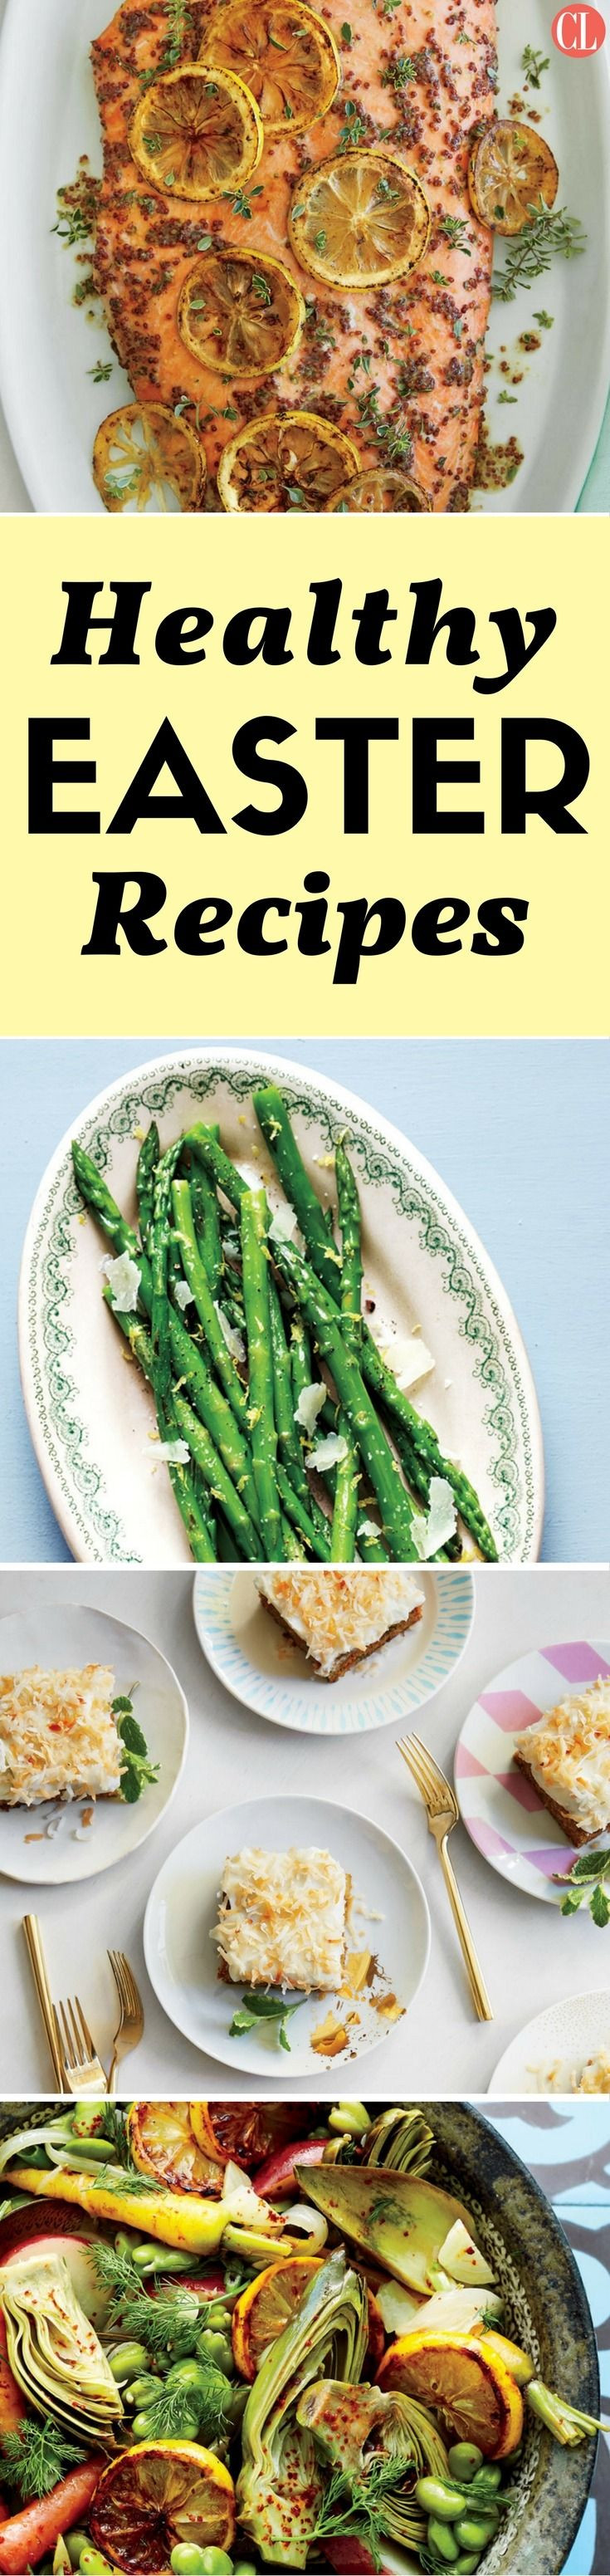 Healthy Easter Dinner Menu
 262 best images about Easter Recipes on Pinterest